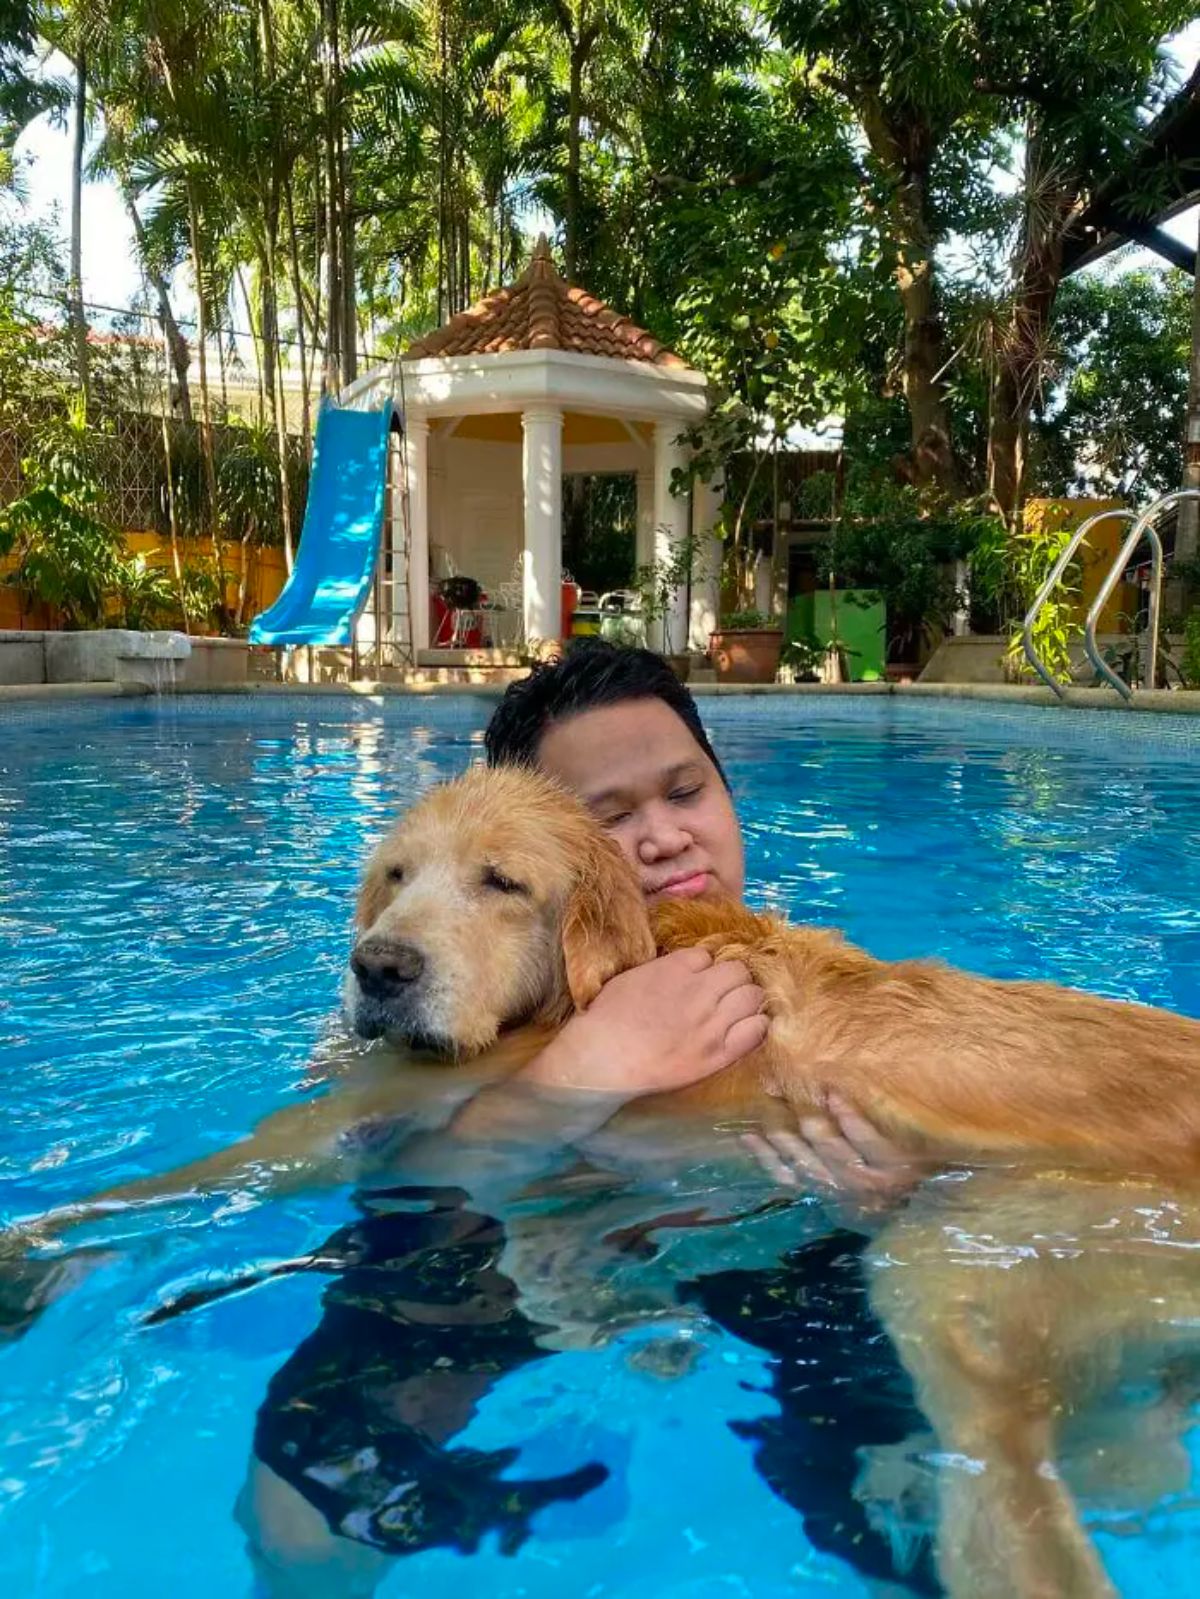 man holding a golden retriever in a swimming pool helping the dog swim